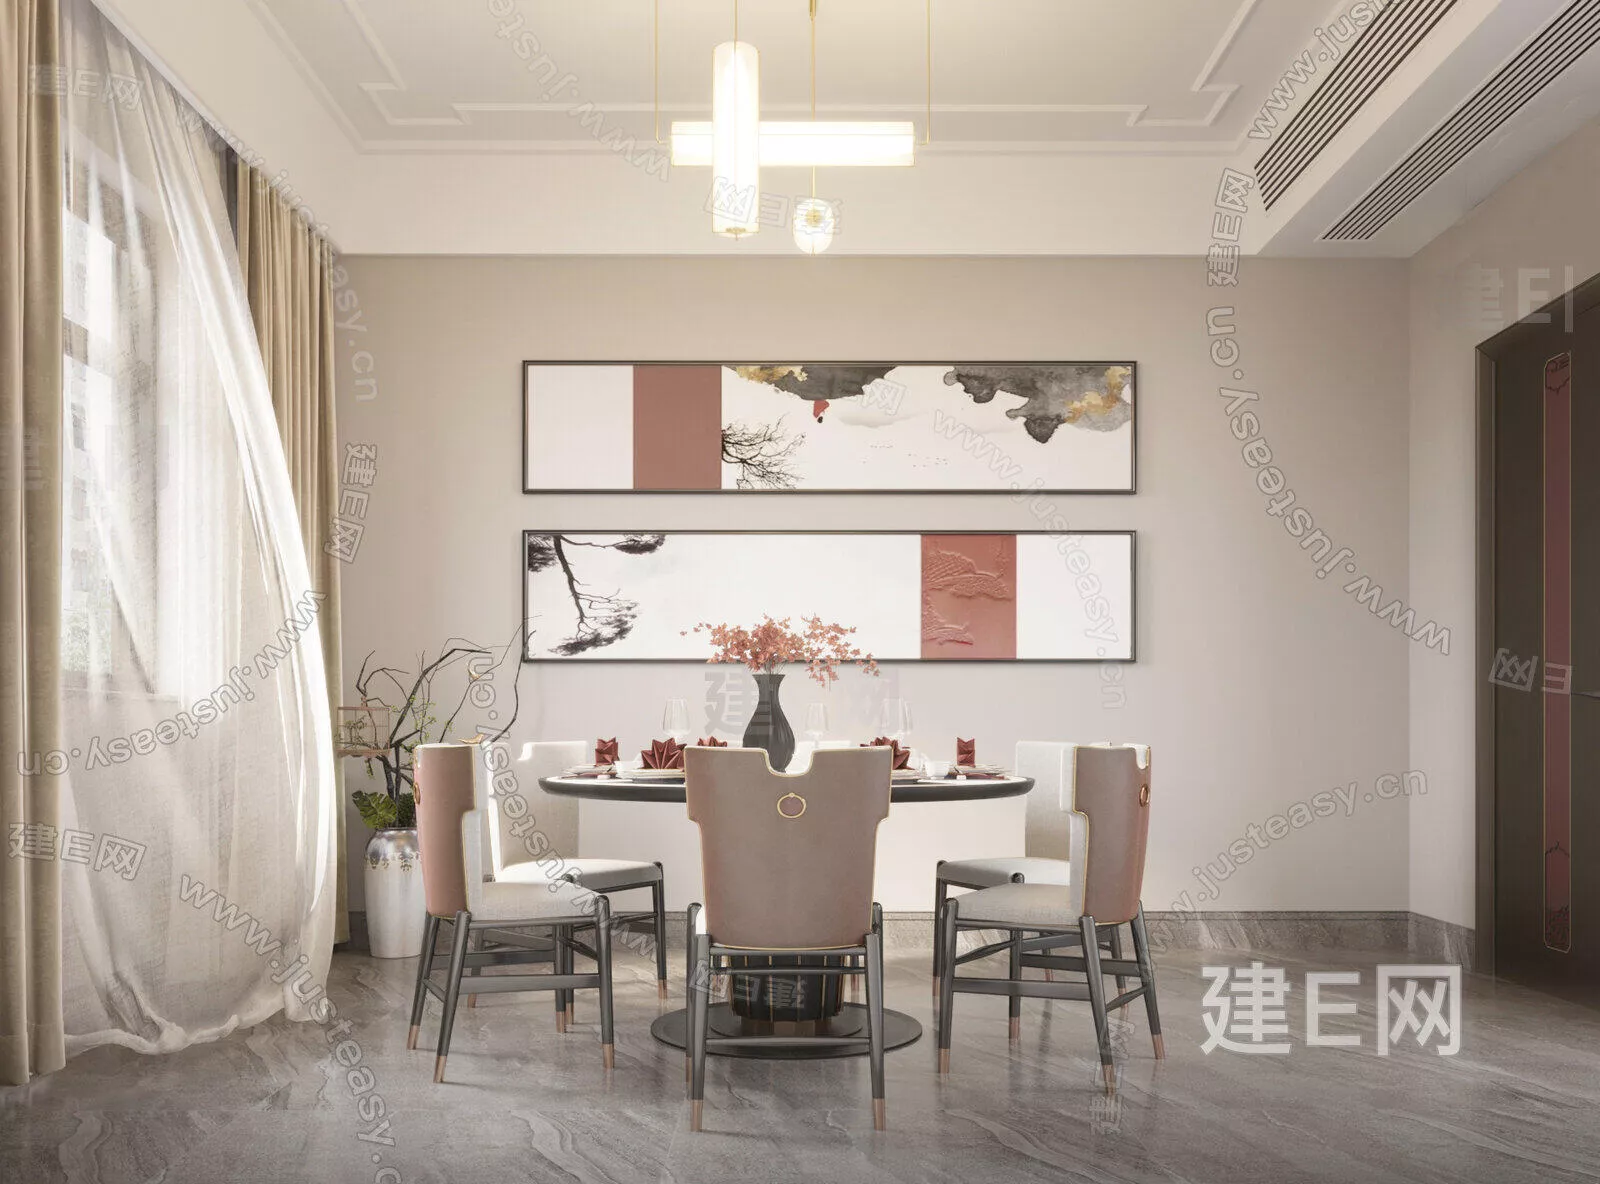 CHINESE DINING ROOM - SKETCHUP 3D SCENE - ENSCAPE - 105926079